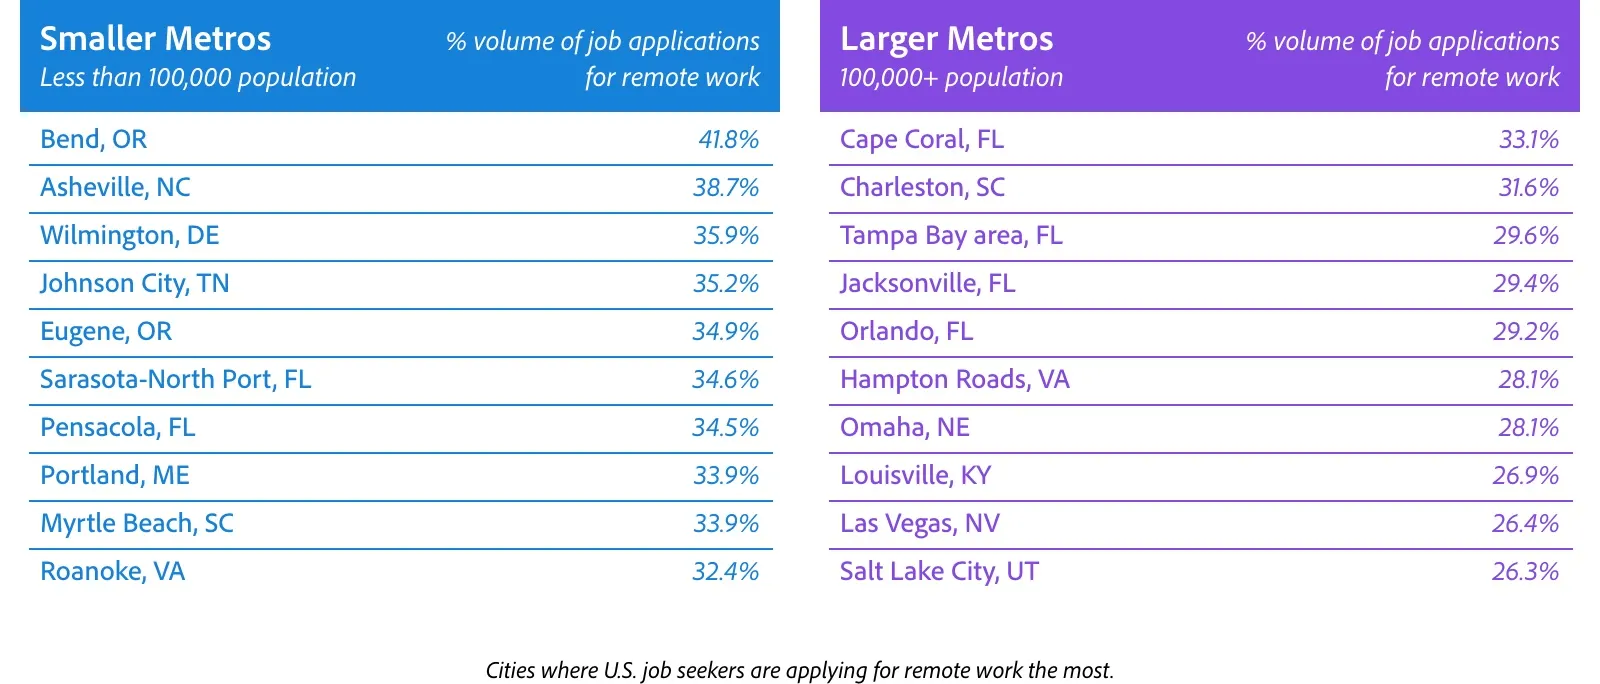 Infograph showing the % volume of job applications for remote work in Smaller Metros vs Larger Metros. 